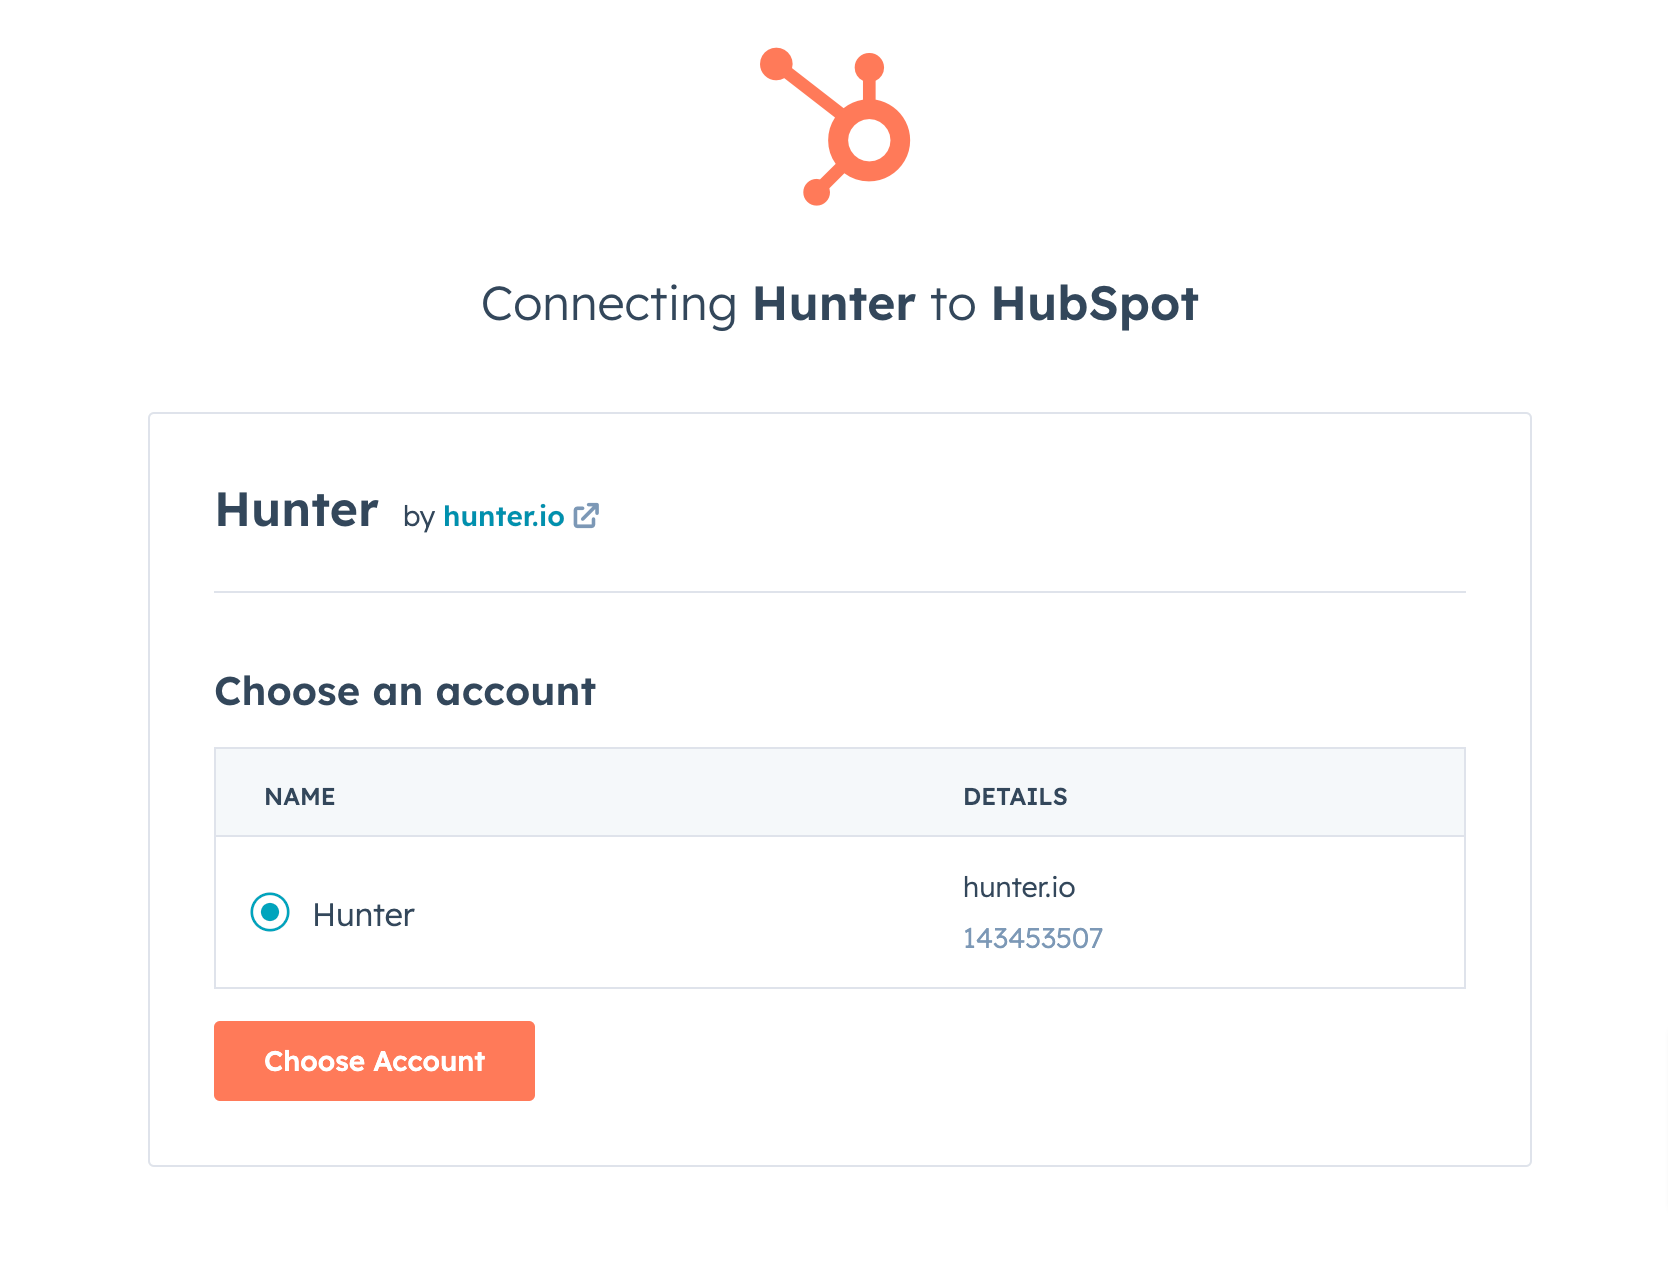 Choosing a Hunter account to connect to HubSpot